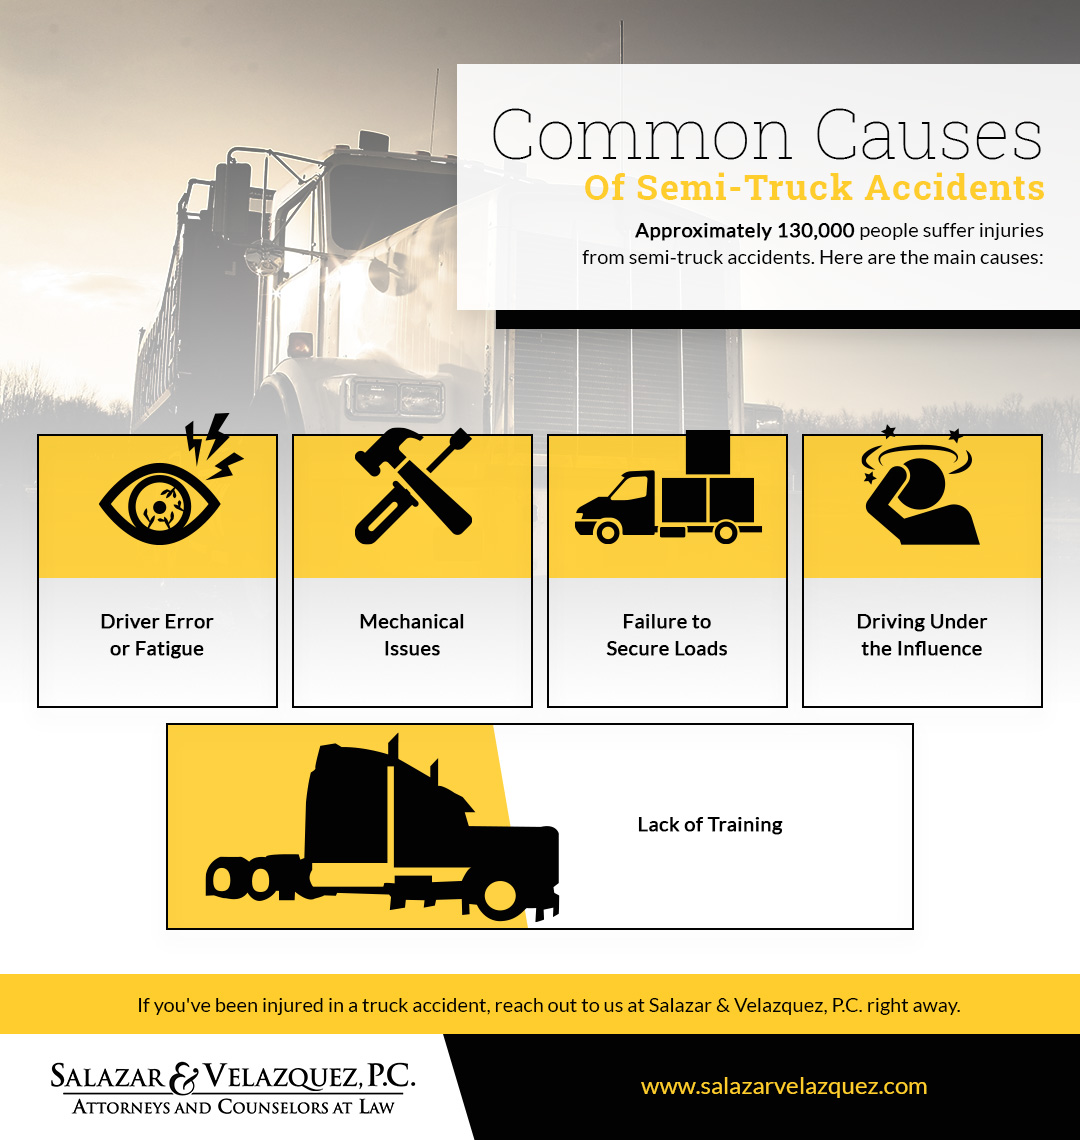 IG - Common Causes of Semi-Truck Accidents